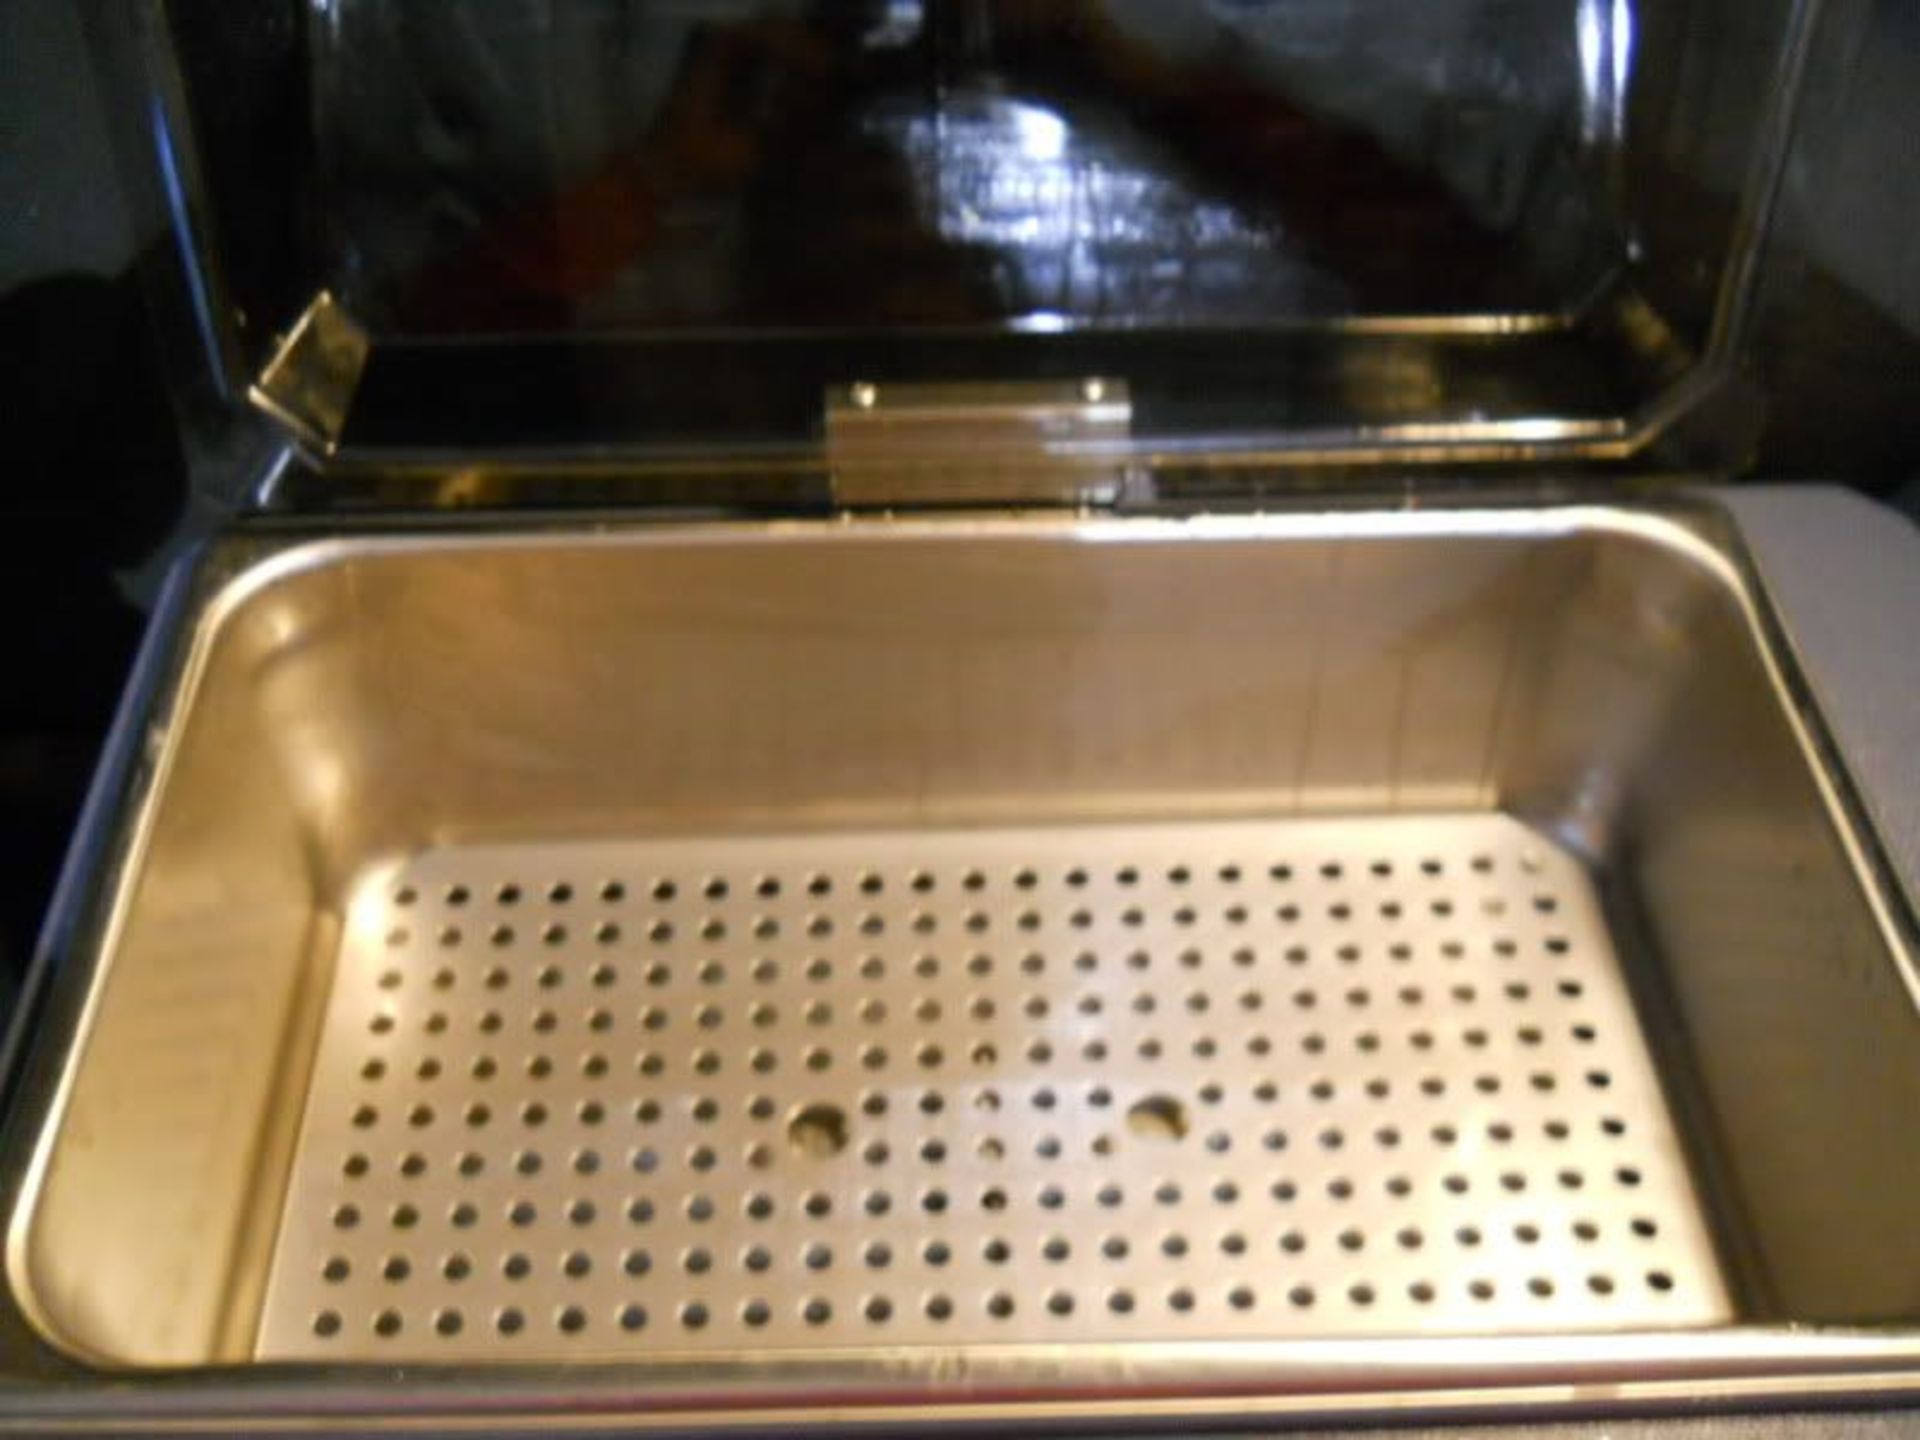 Fisher Scientific Isotemp 120 Water Bath Cat No 15-460-20 (1546020), Qty 1, 321058350159 - Image 2 of 7